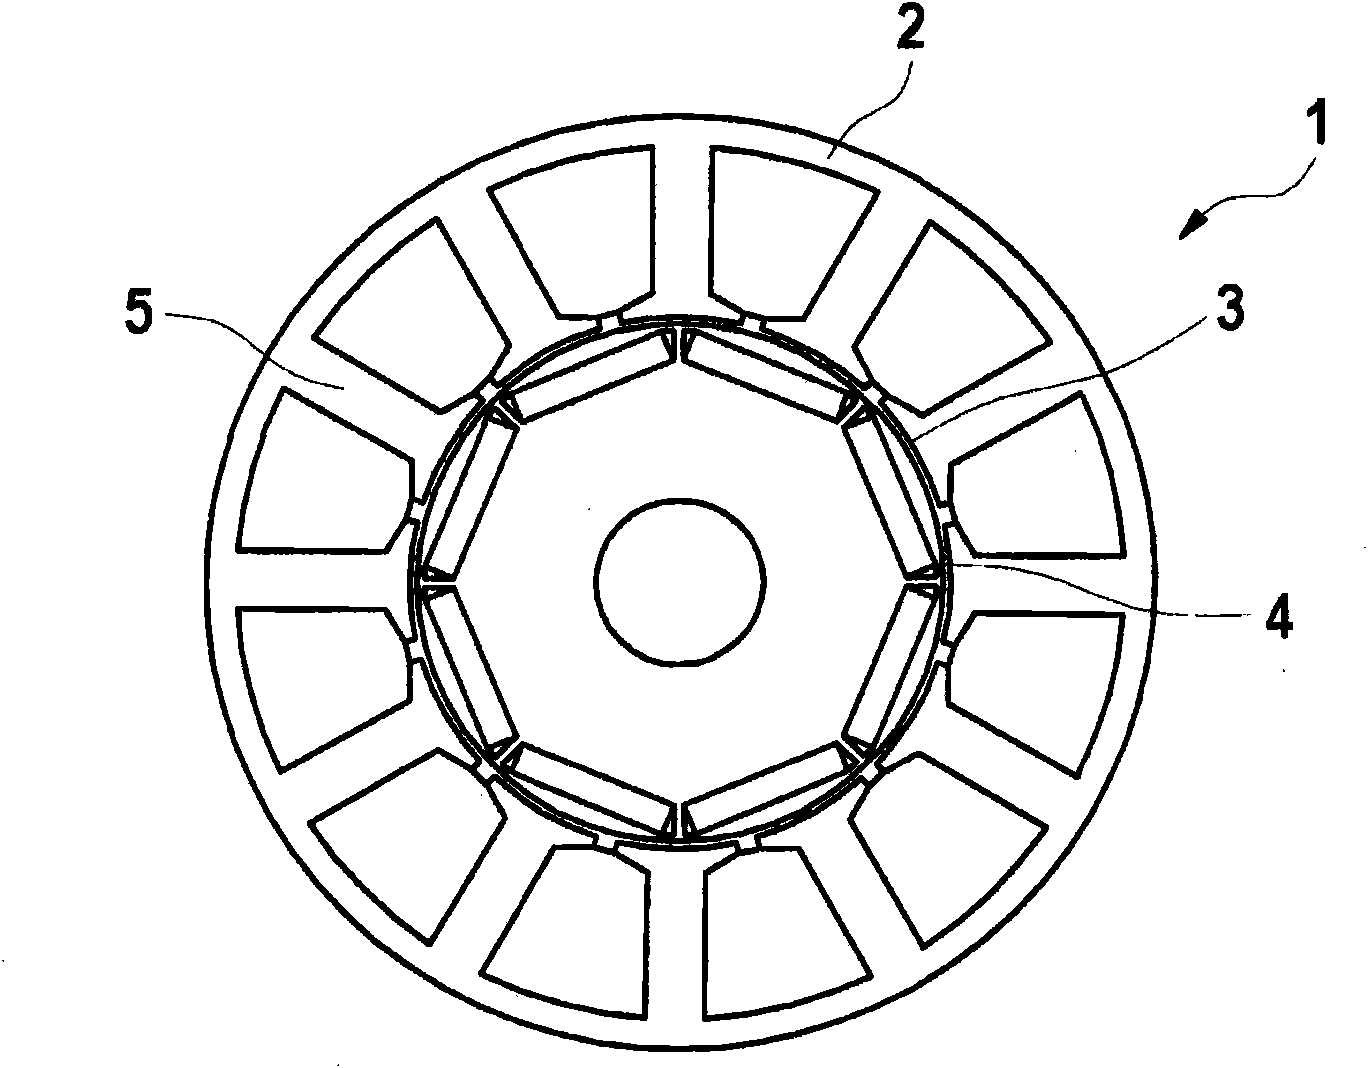 Electric machine and rotor arrangement